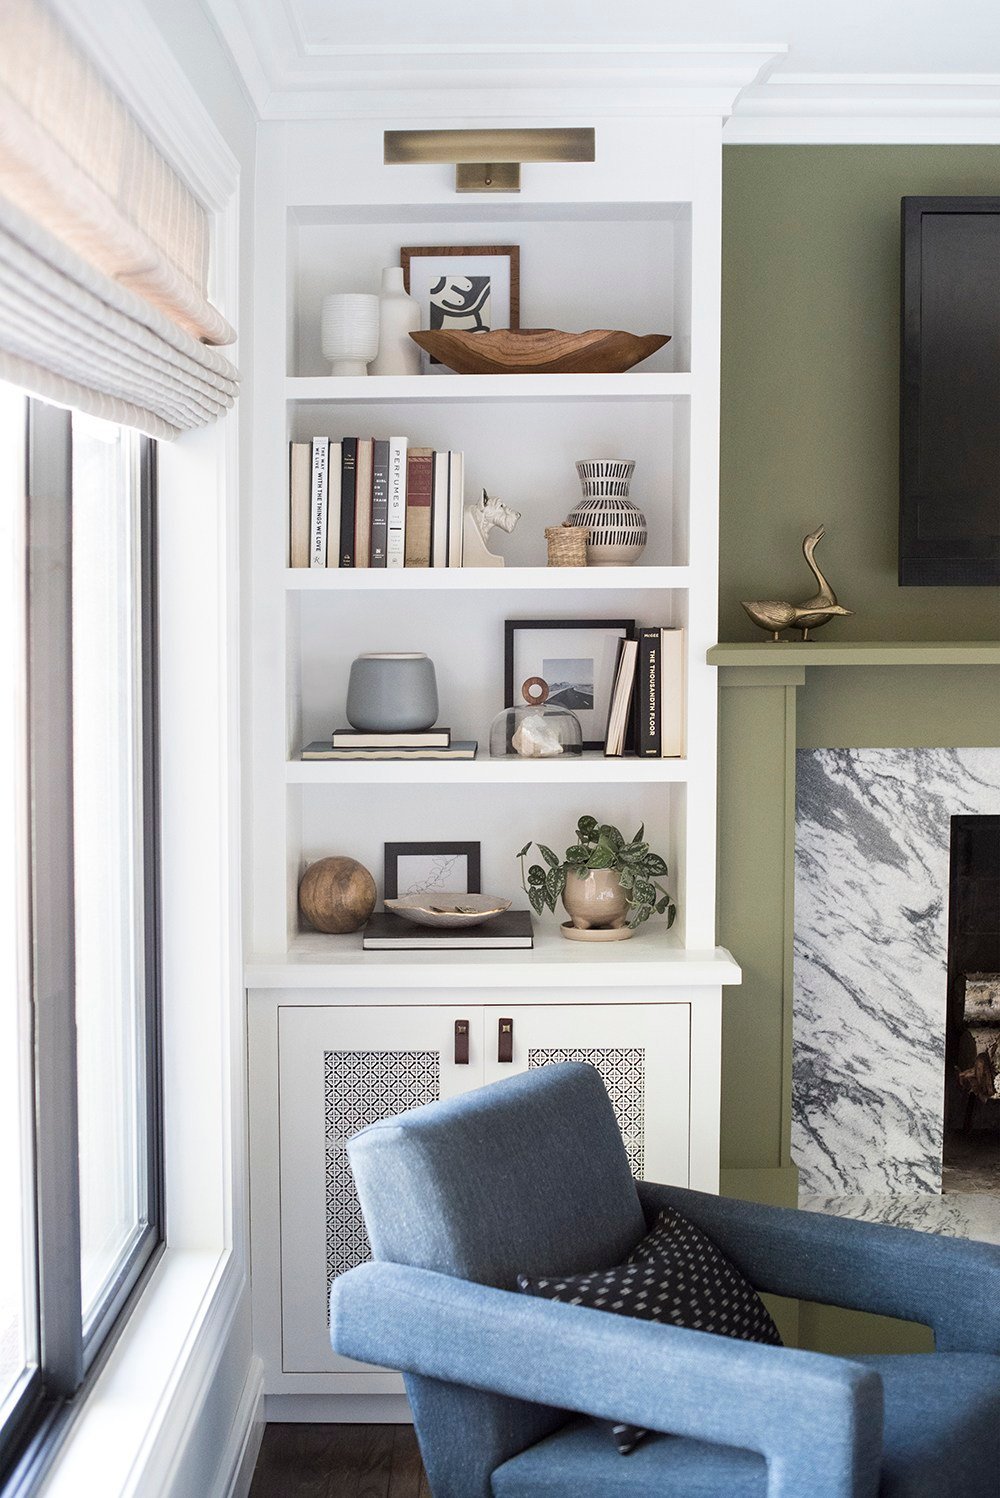 5 Inspiring Shelf Styling & Built-In Posts - roomfortuesday.com